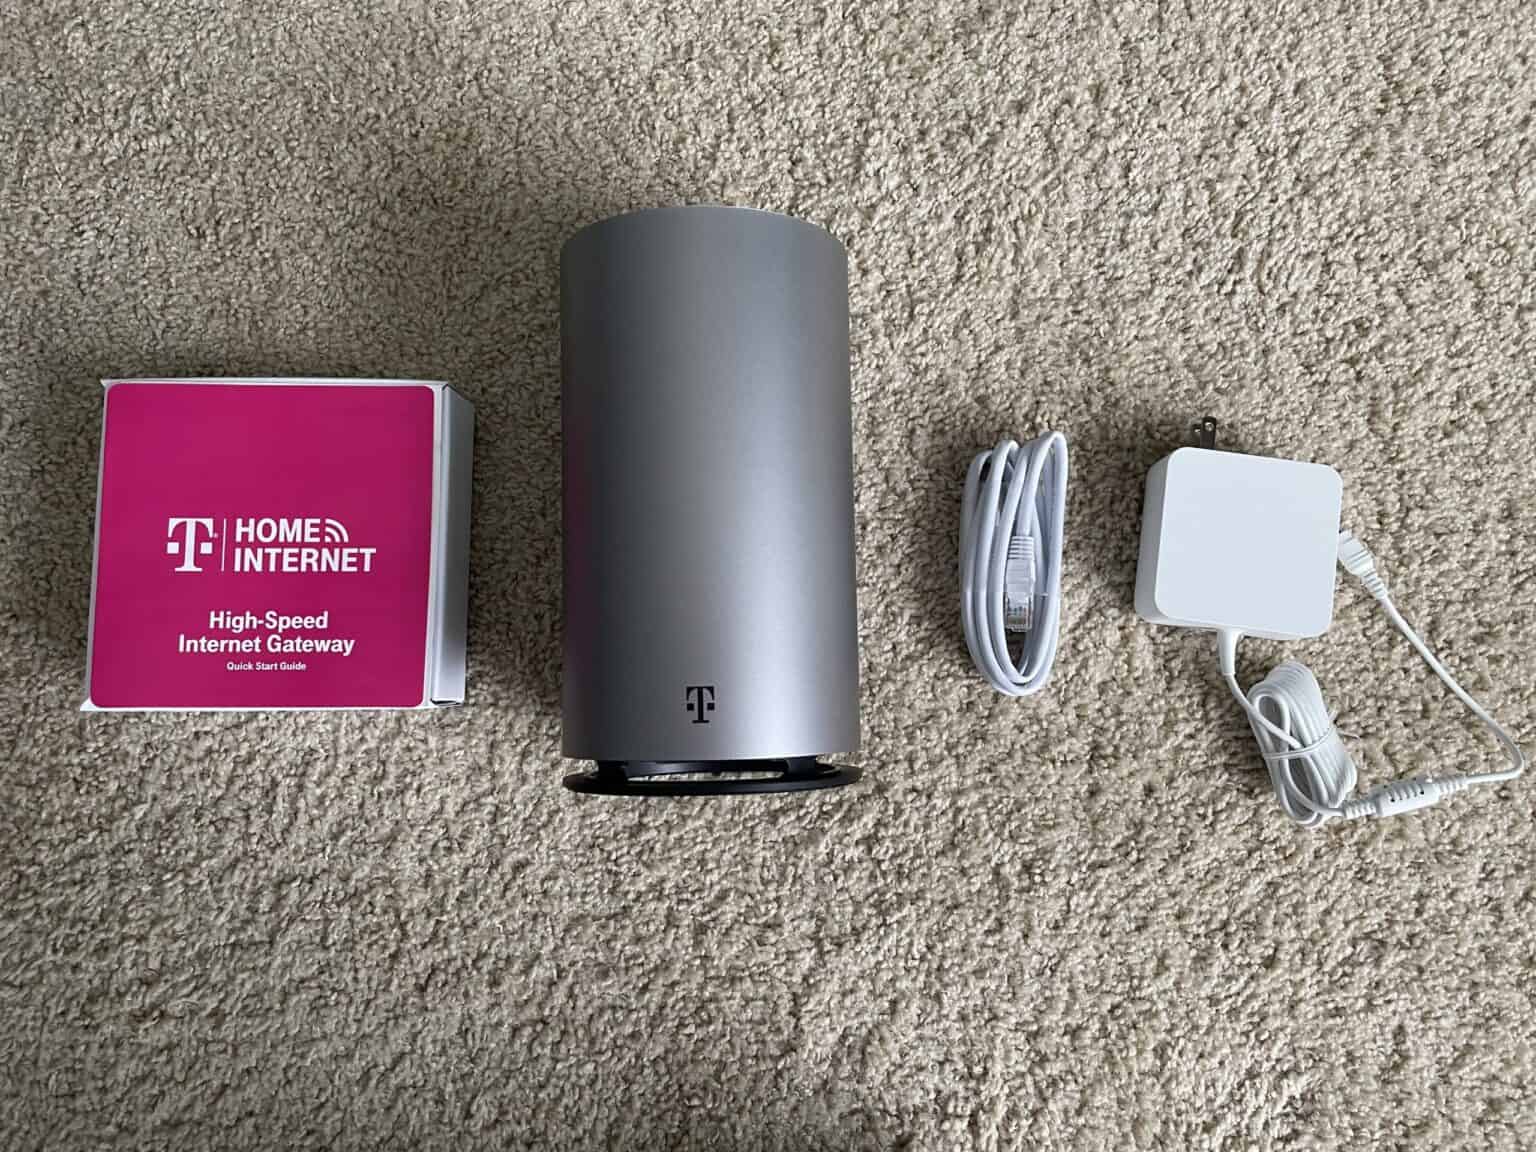 T Mobile 5G Home Unboxed 1 Scaled E1629995449866 1536x1152 